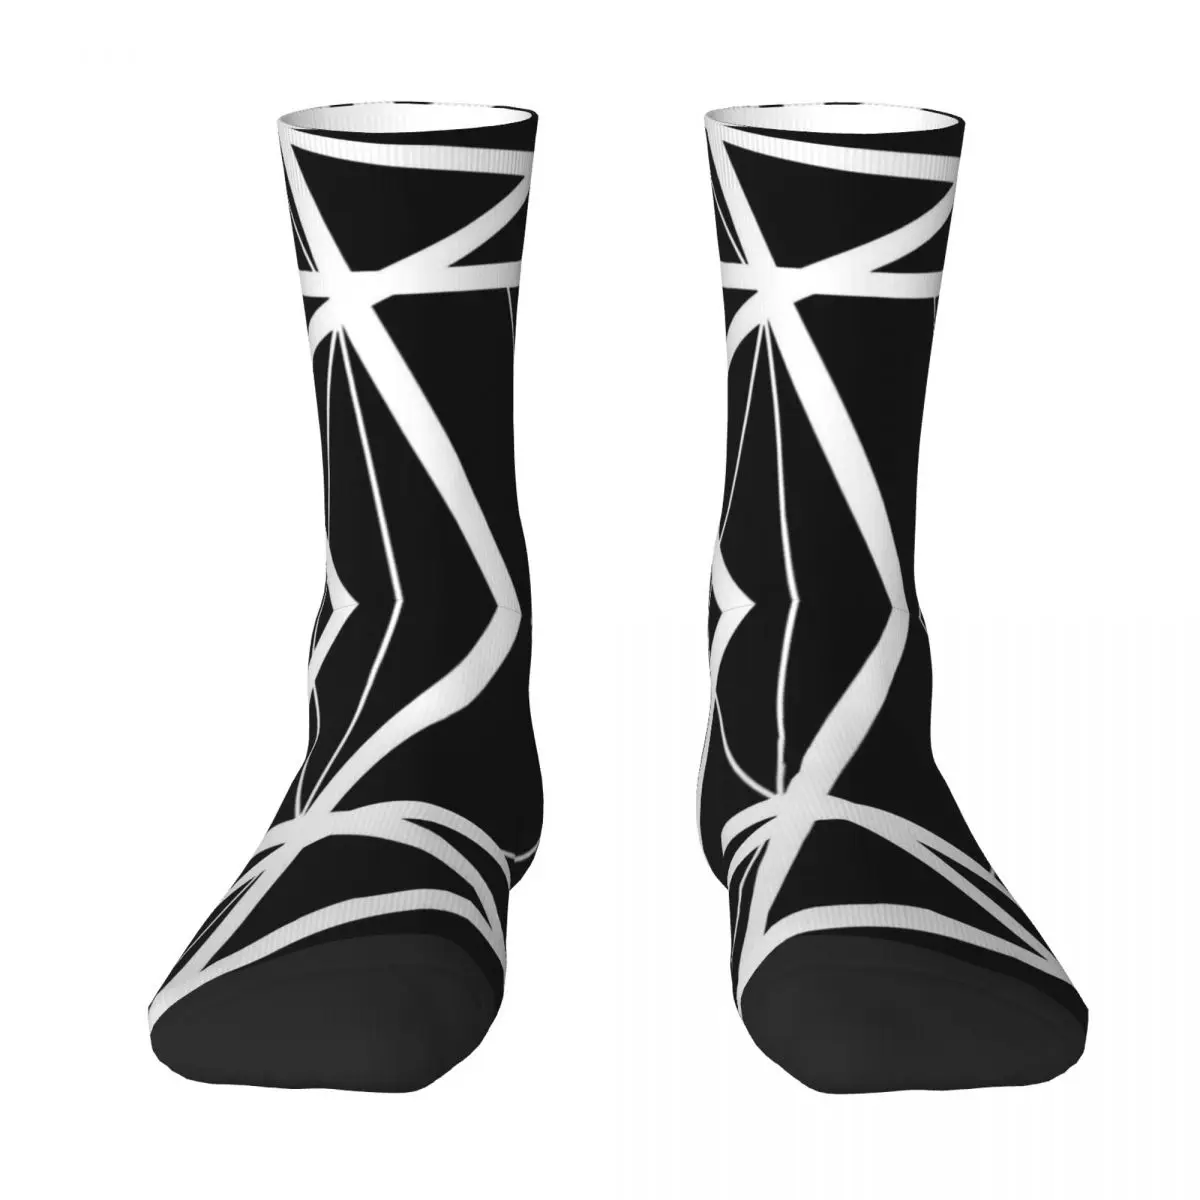 Black White Unisex Winter Socks Outdoor Happy Socks Street Style Crazy Sock goodeal 1 2 pairs standard thickness men socks black white color fashion style simple cotton striped socks unisex casual sock